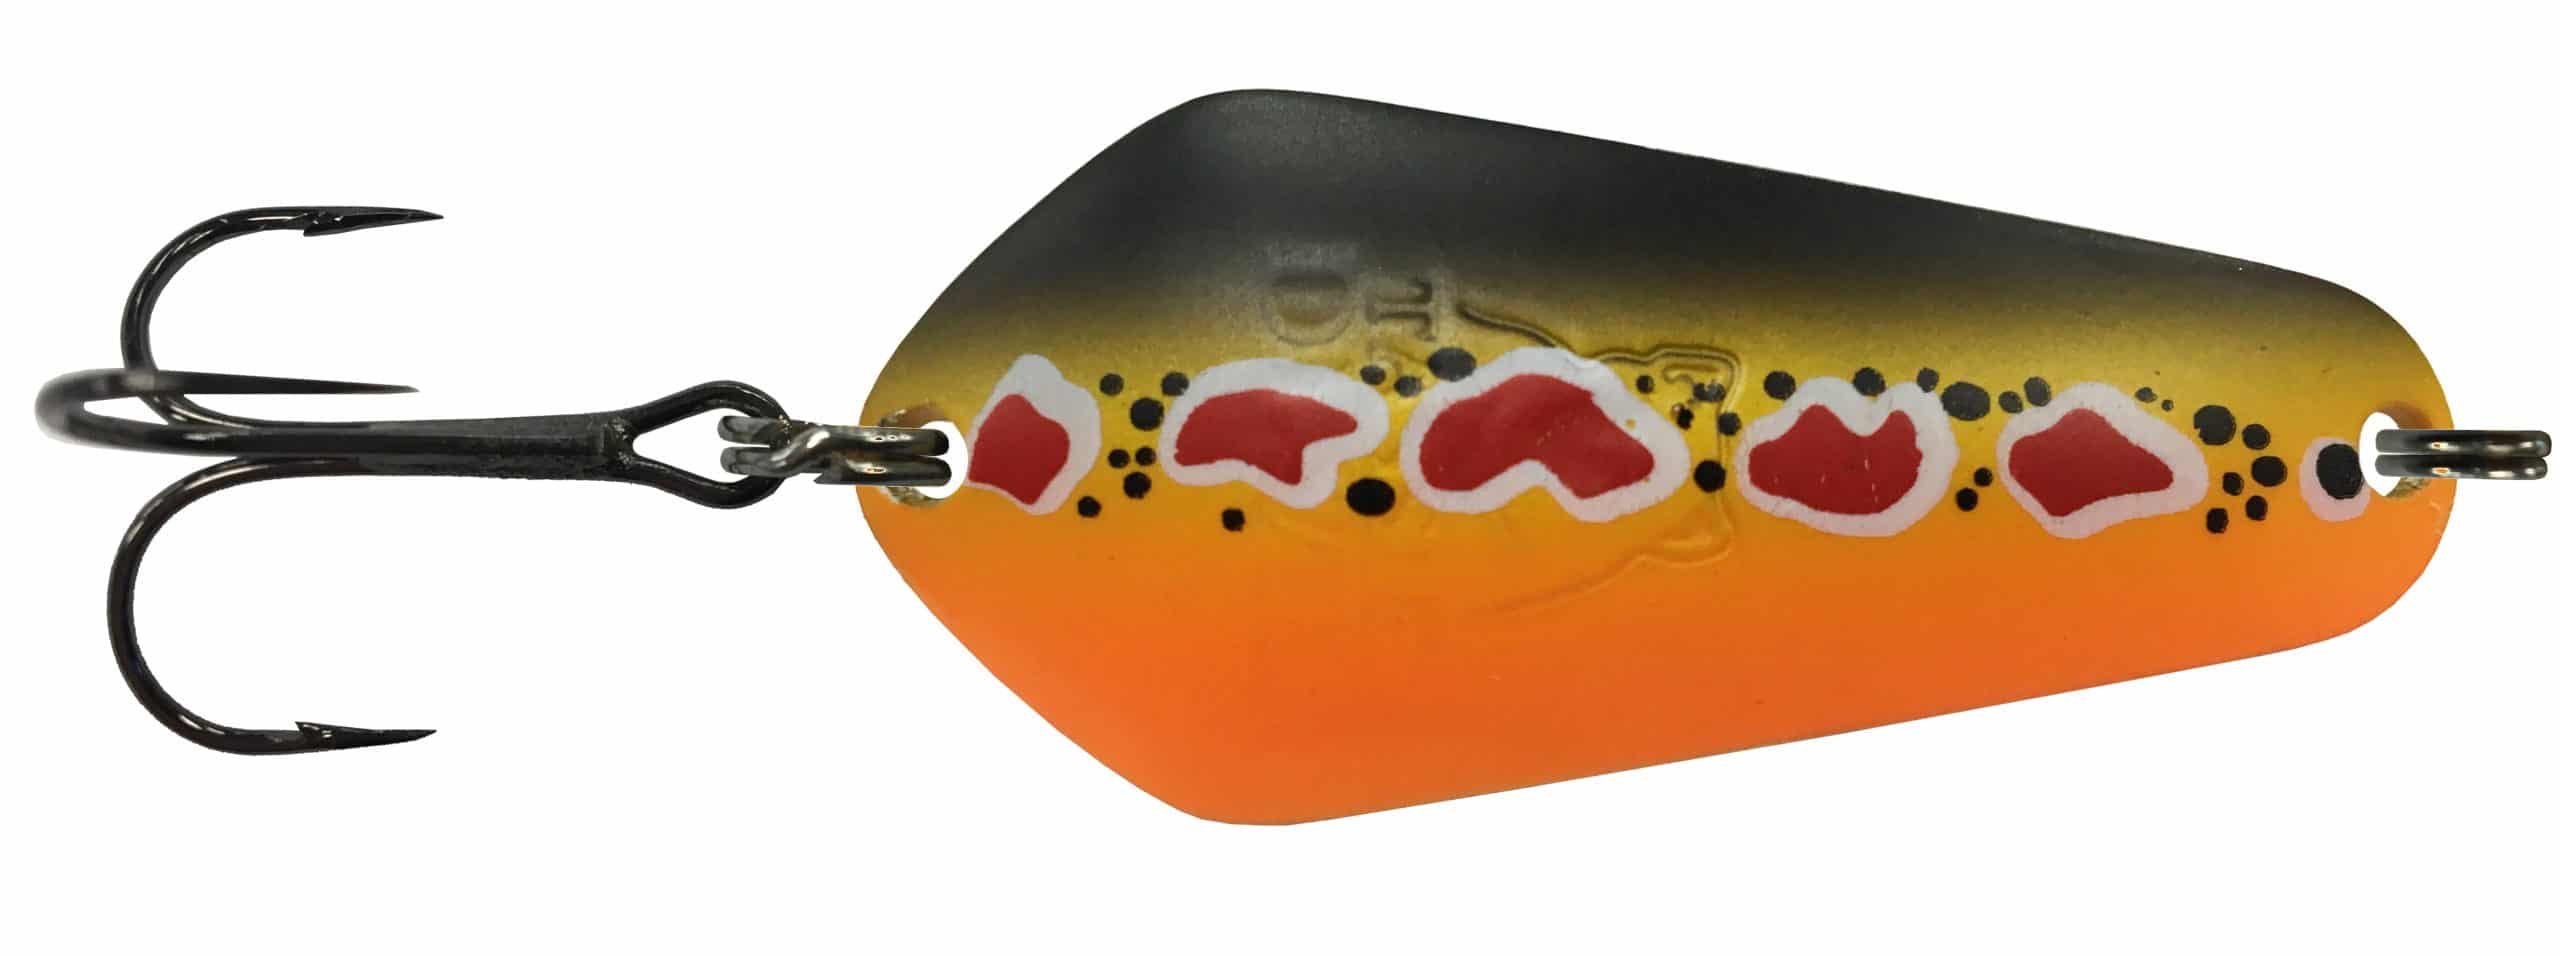 Tassie Devil Spoon 9.0gm - 9.0GM / SPOTTED DOG UV - Mansfield Hunting & Fishing - Products to prepare for Corona Virus